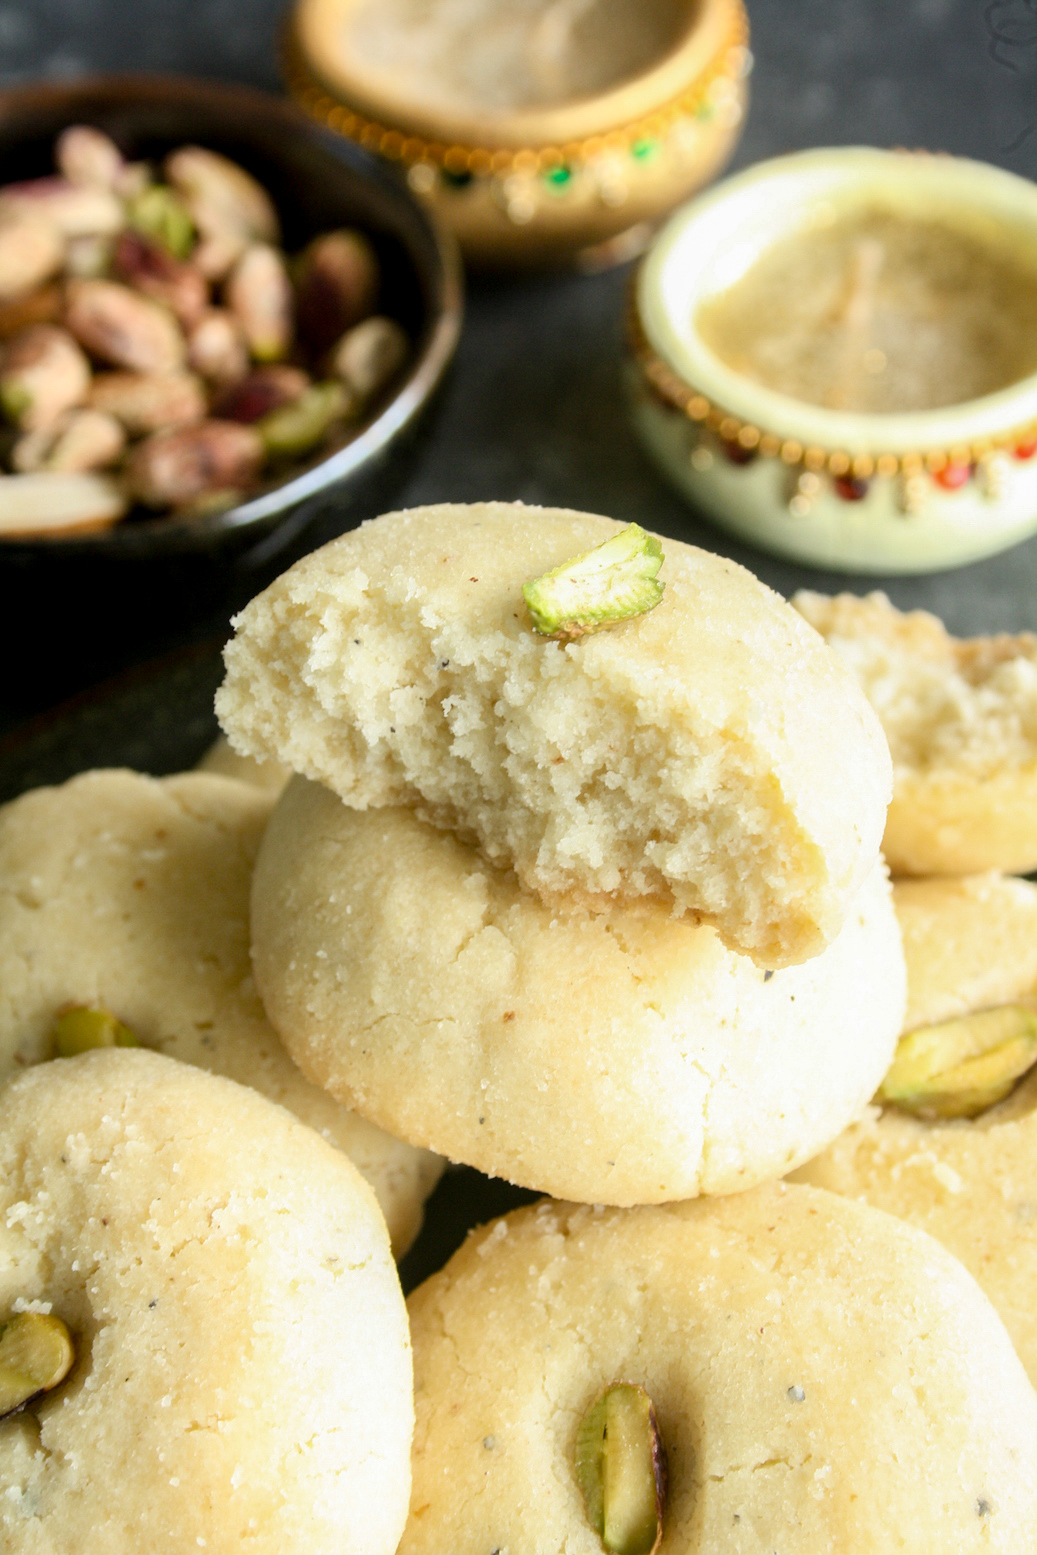 Indian-style shortbread cookies made with ghee and flavoured with cardamom